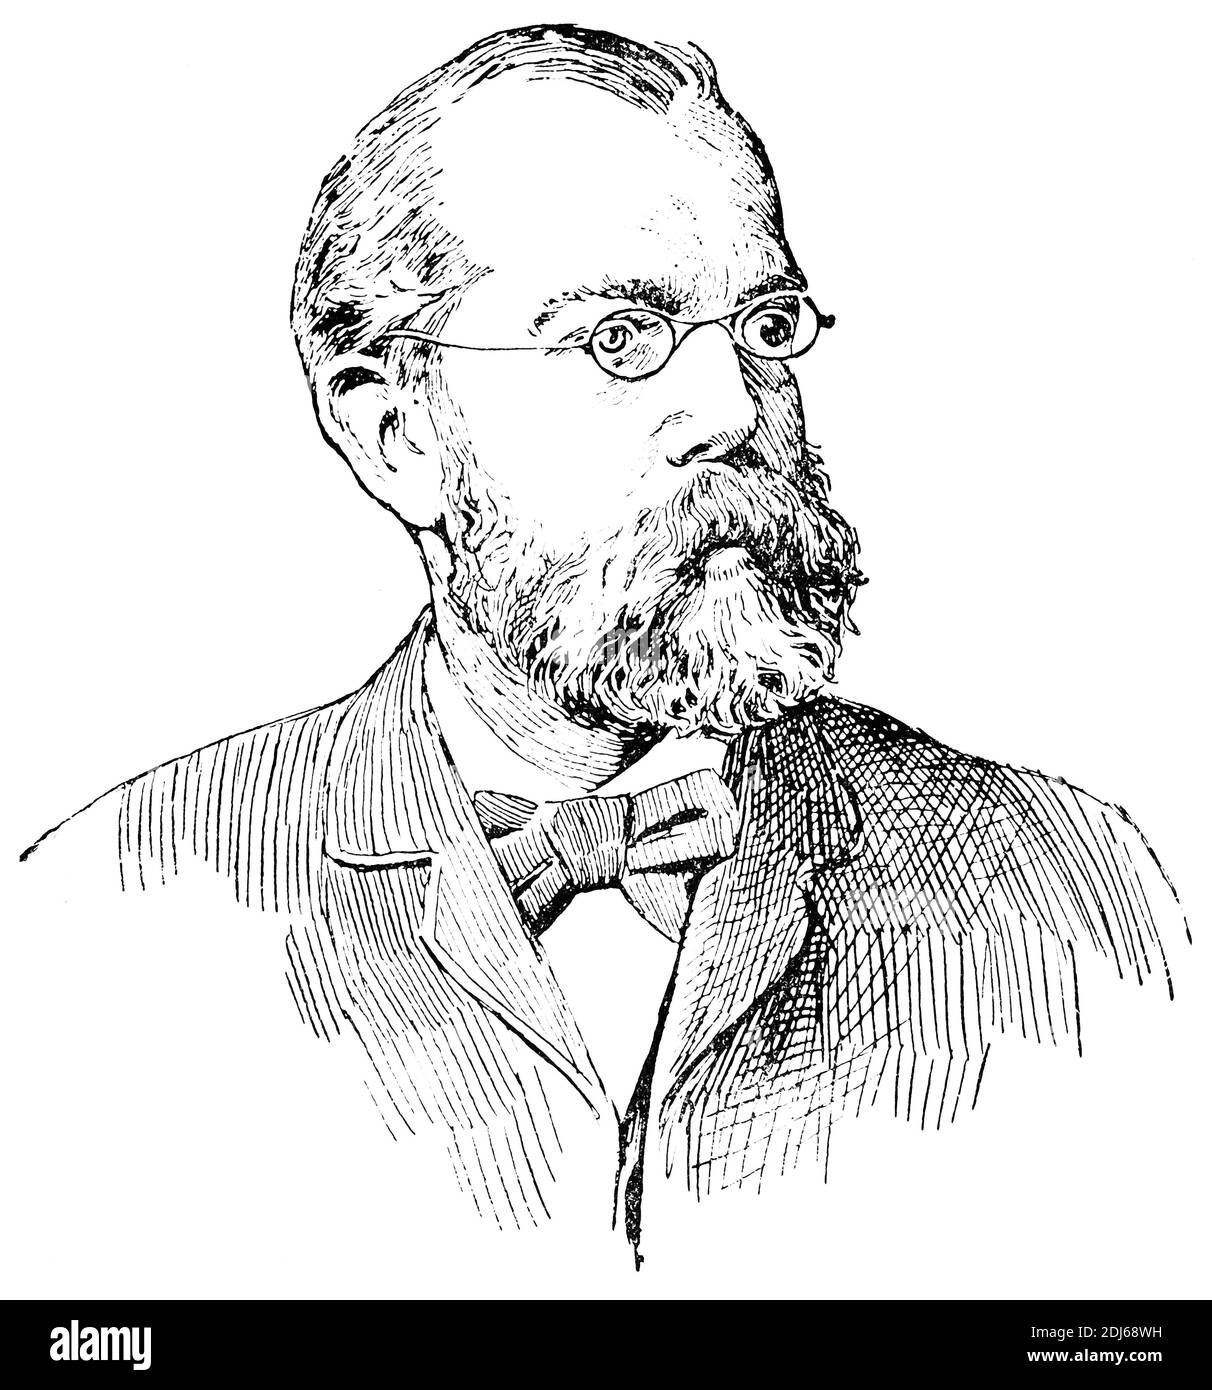 Portrait of Heinrich Hermann Robert Koch - a German physician and microbiologist. Illustration of the 19th century. Germany. White background. Stock Photo